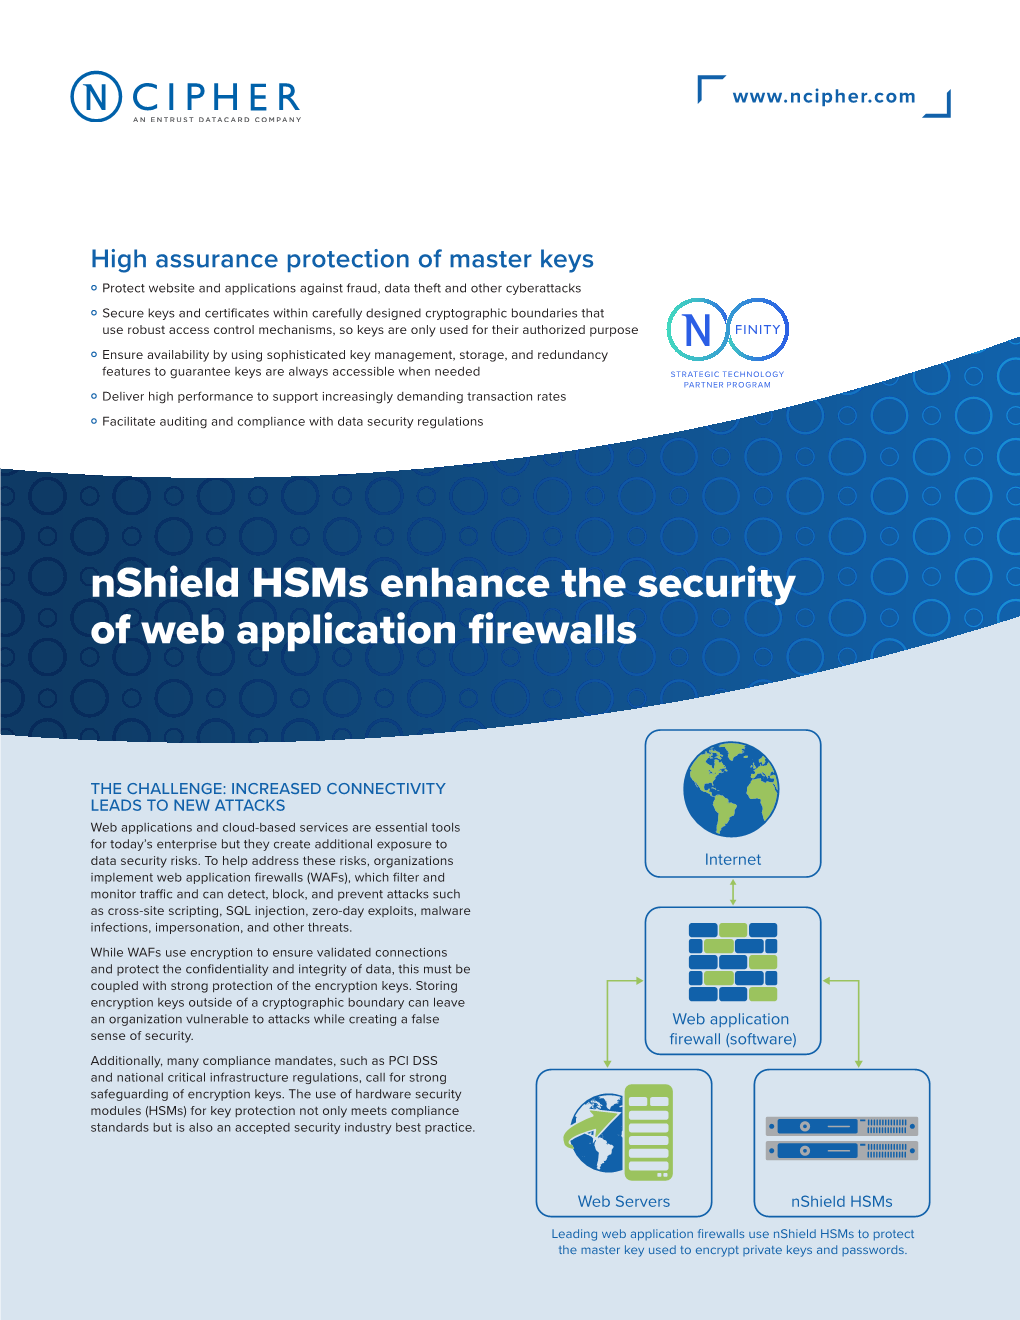 Nshield Hsms Enhance the Security of Web Application Firewalls